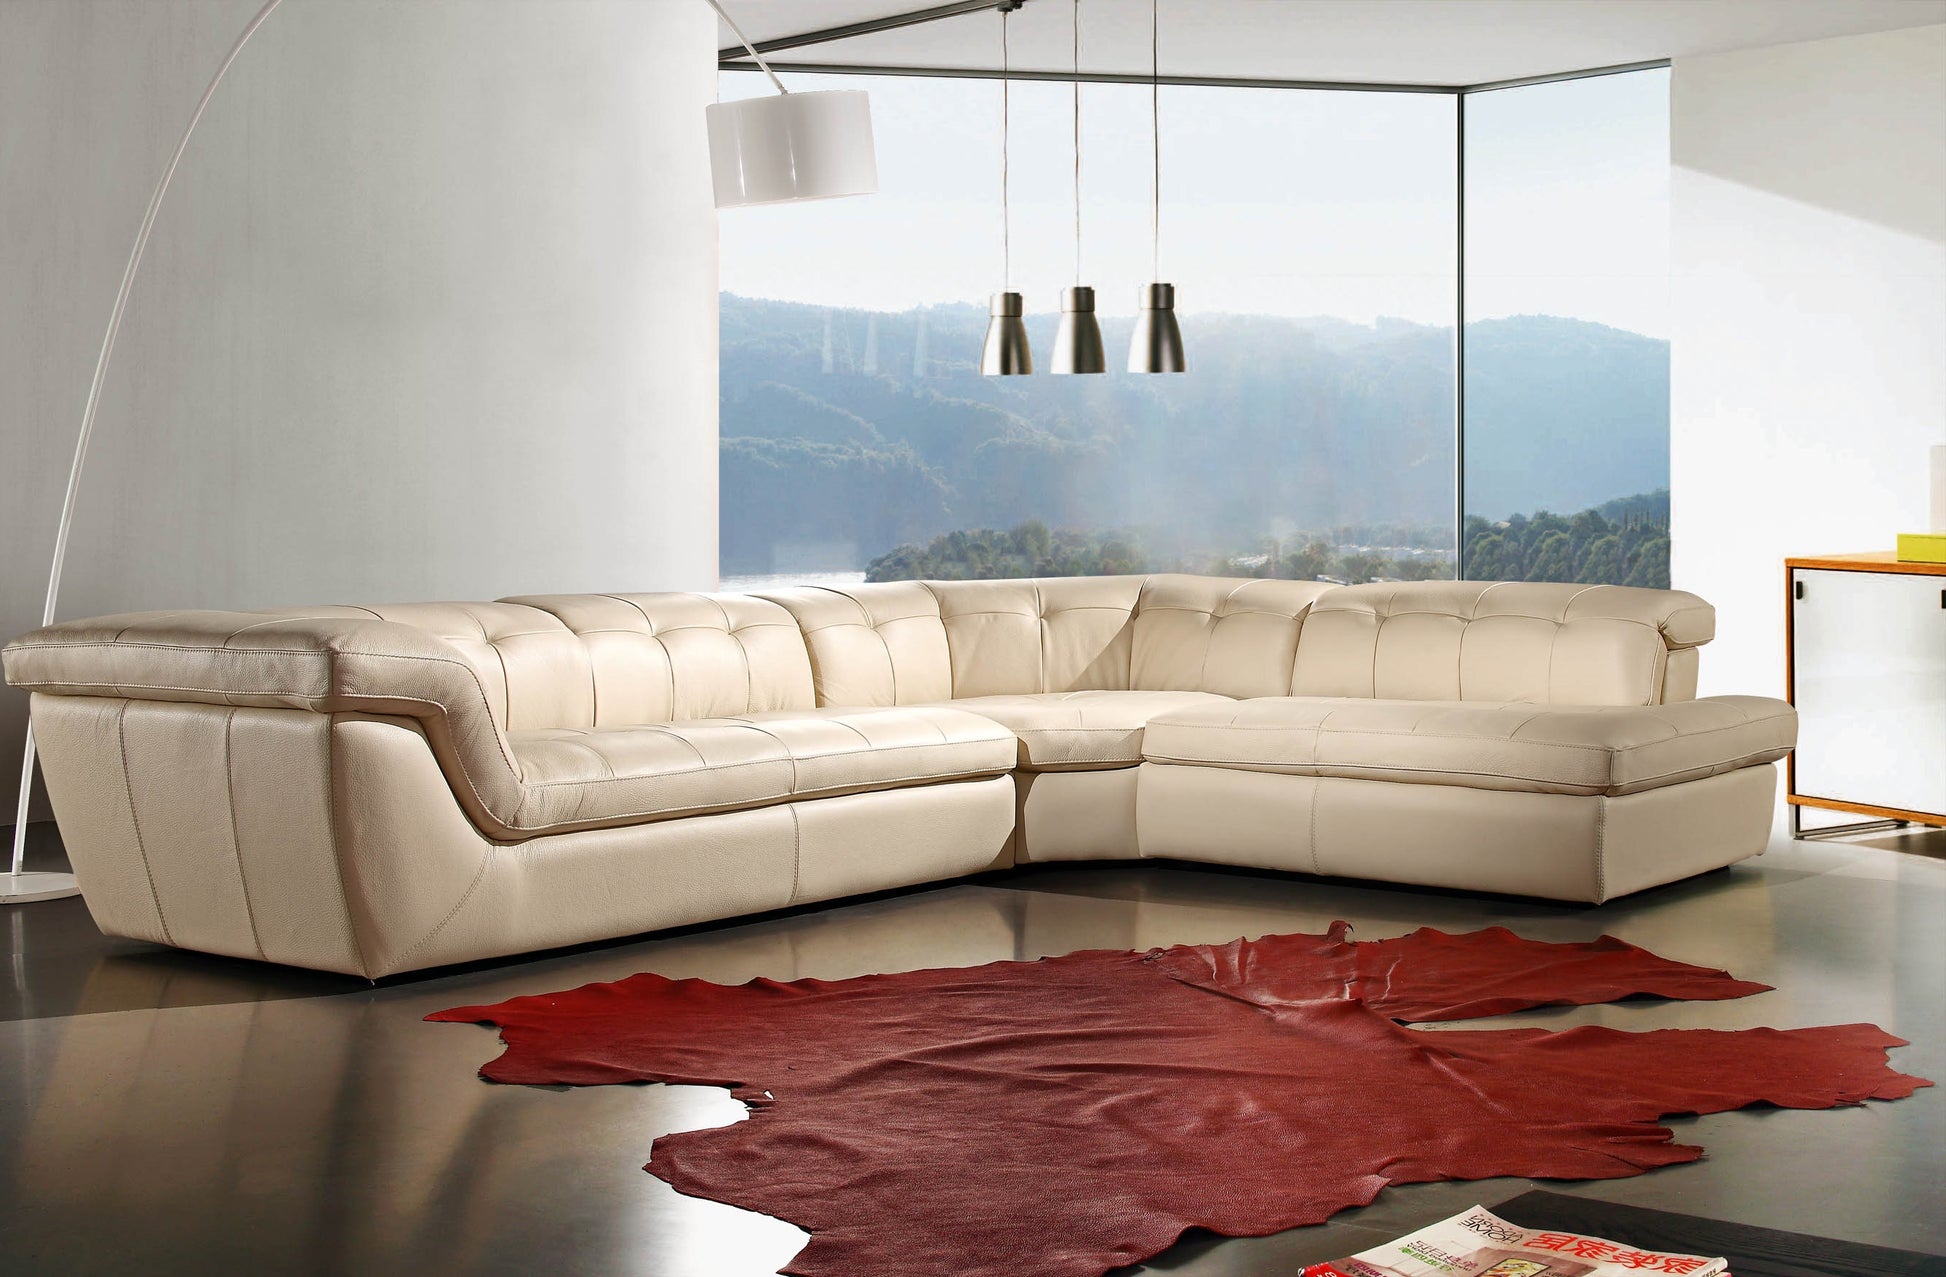 397 Italian Leather Sectional Sofa Beige Color RHF by JM